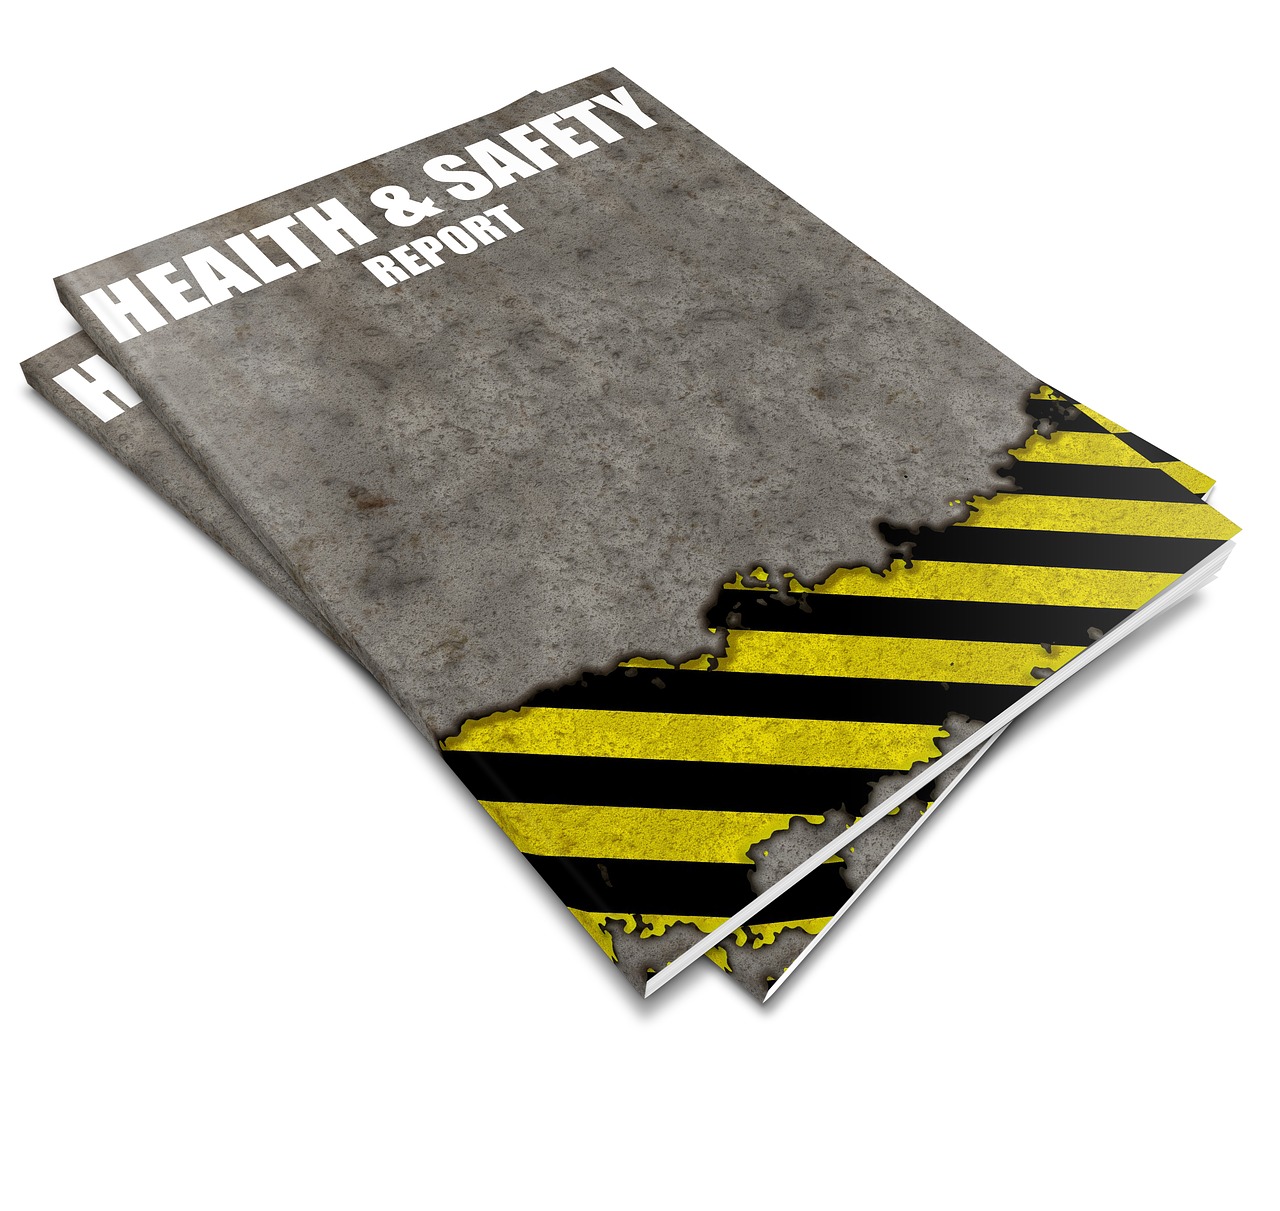 health and safety report health free photo